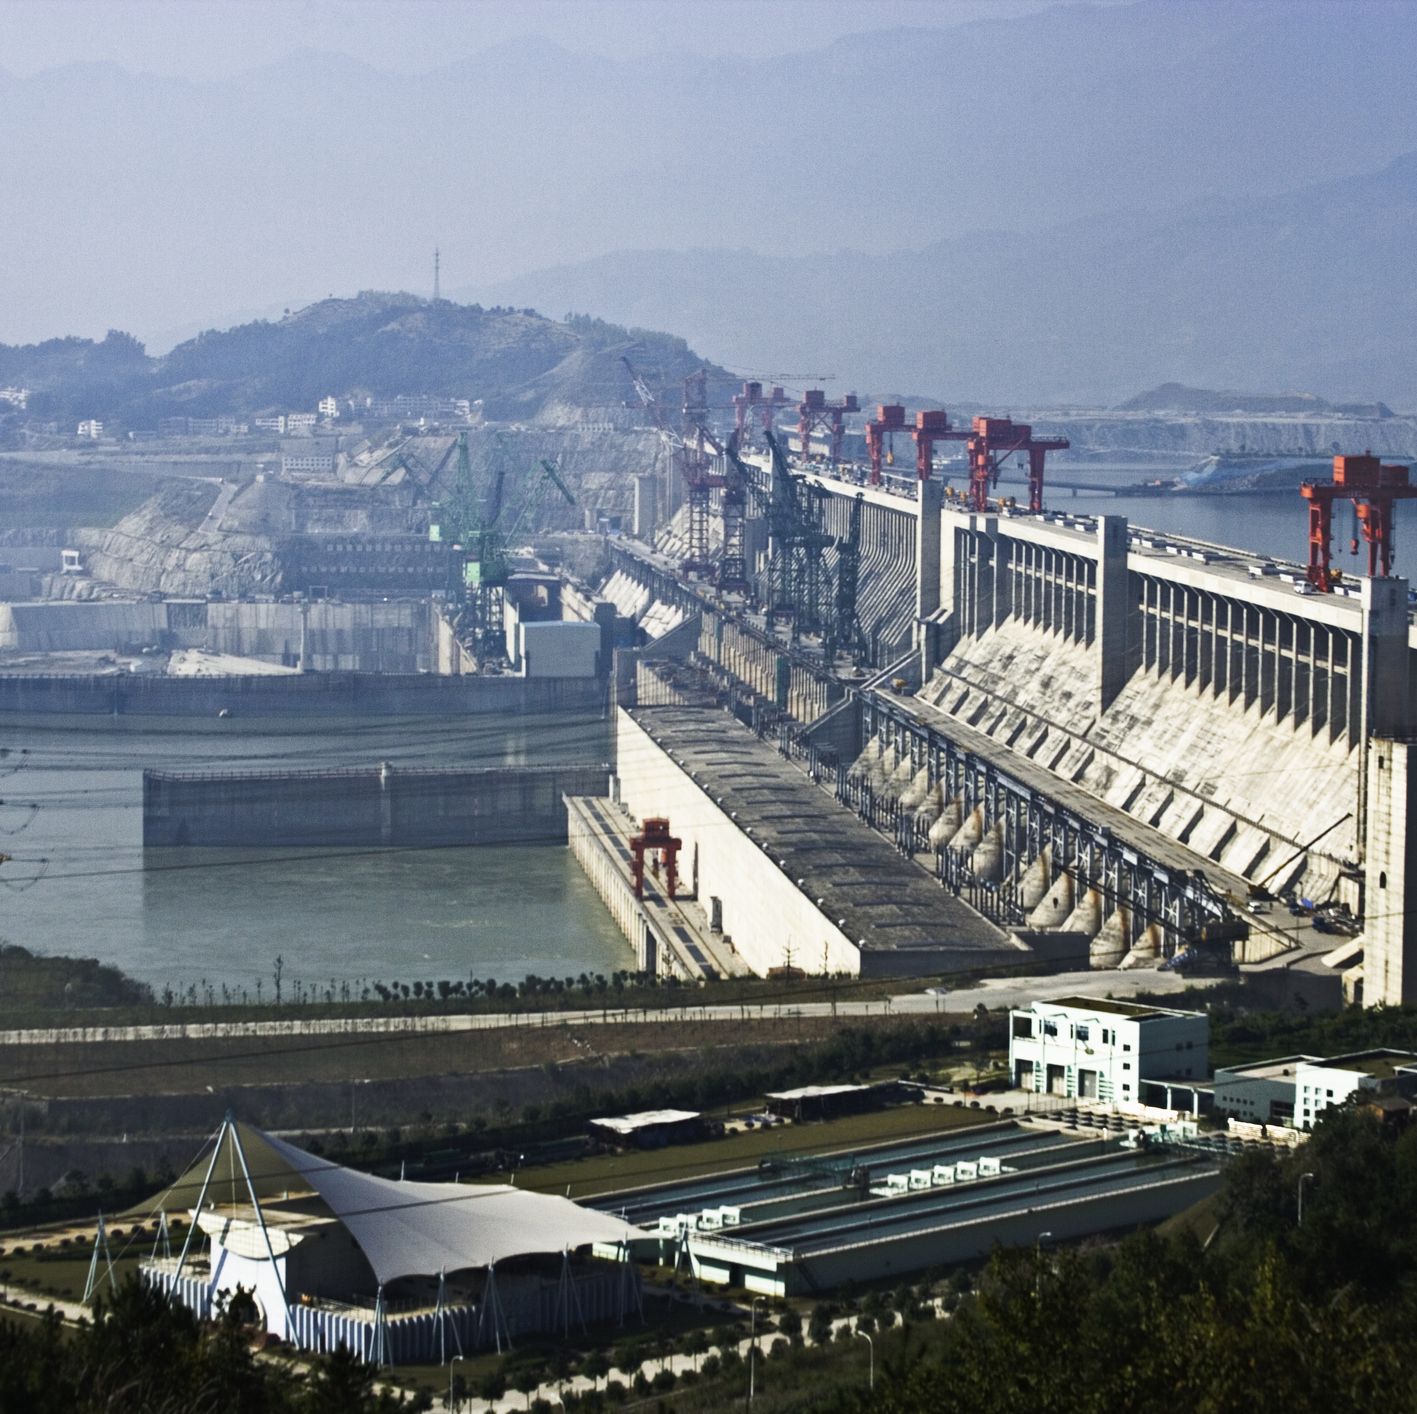 China Is 3D Printing a Massive 590-Foot-Tall Dam ... All Without Humans